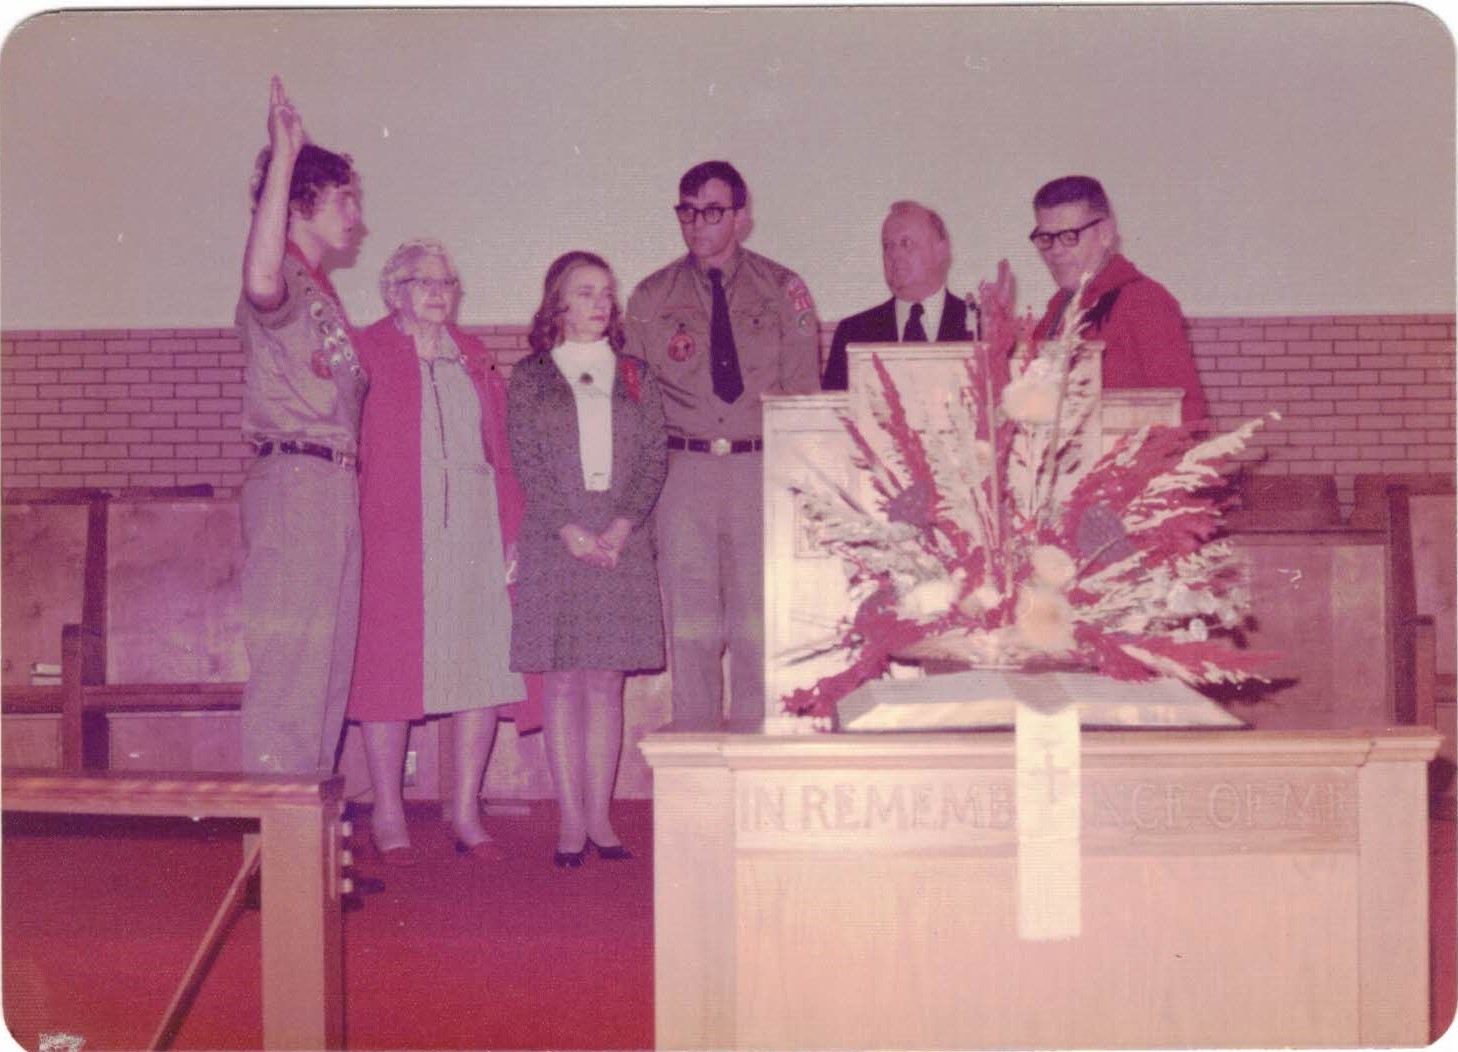 Tom Vail Eagle Scout award ceremony<br />
- January 1975